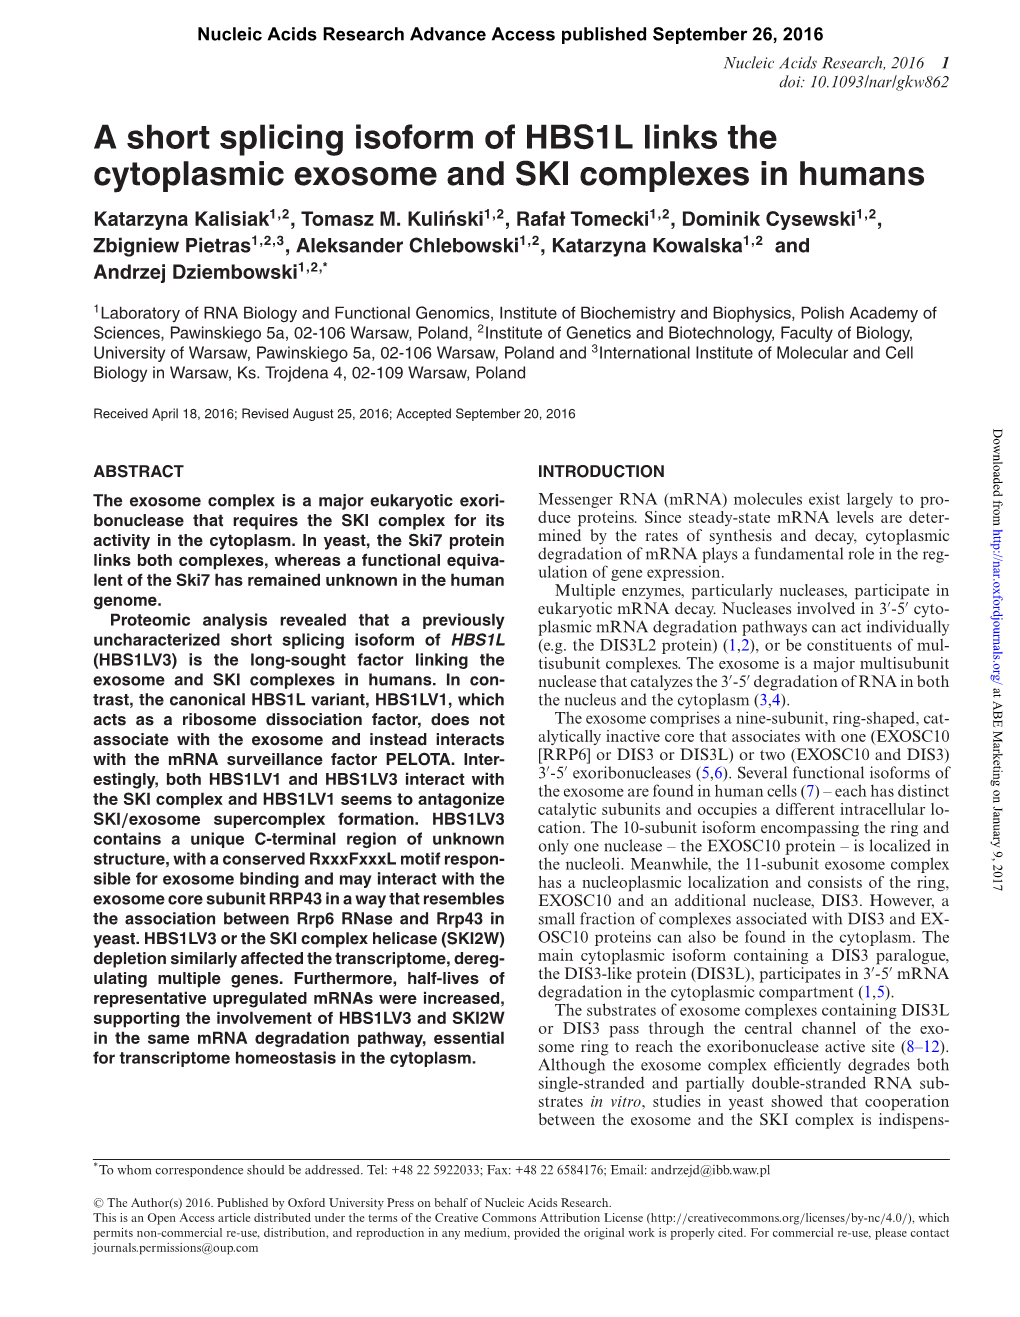 A Short Splicing Isoform of HBS1L Links the Cytoplasmic Exosome and SKI Complexes in Humans Katarzyna Kalisiak1,2, Tomasz M